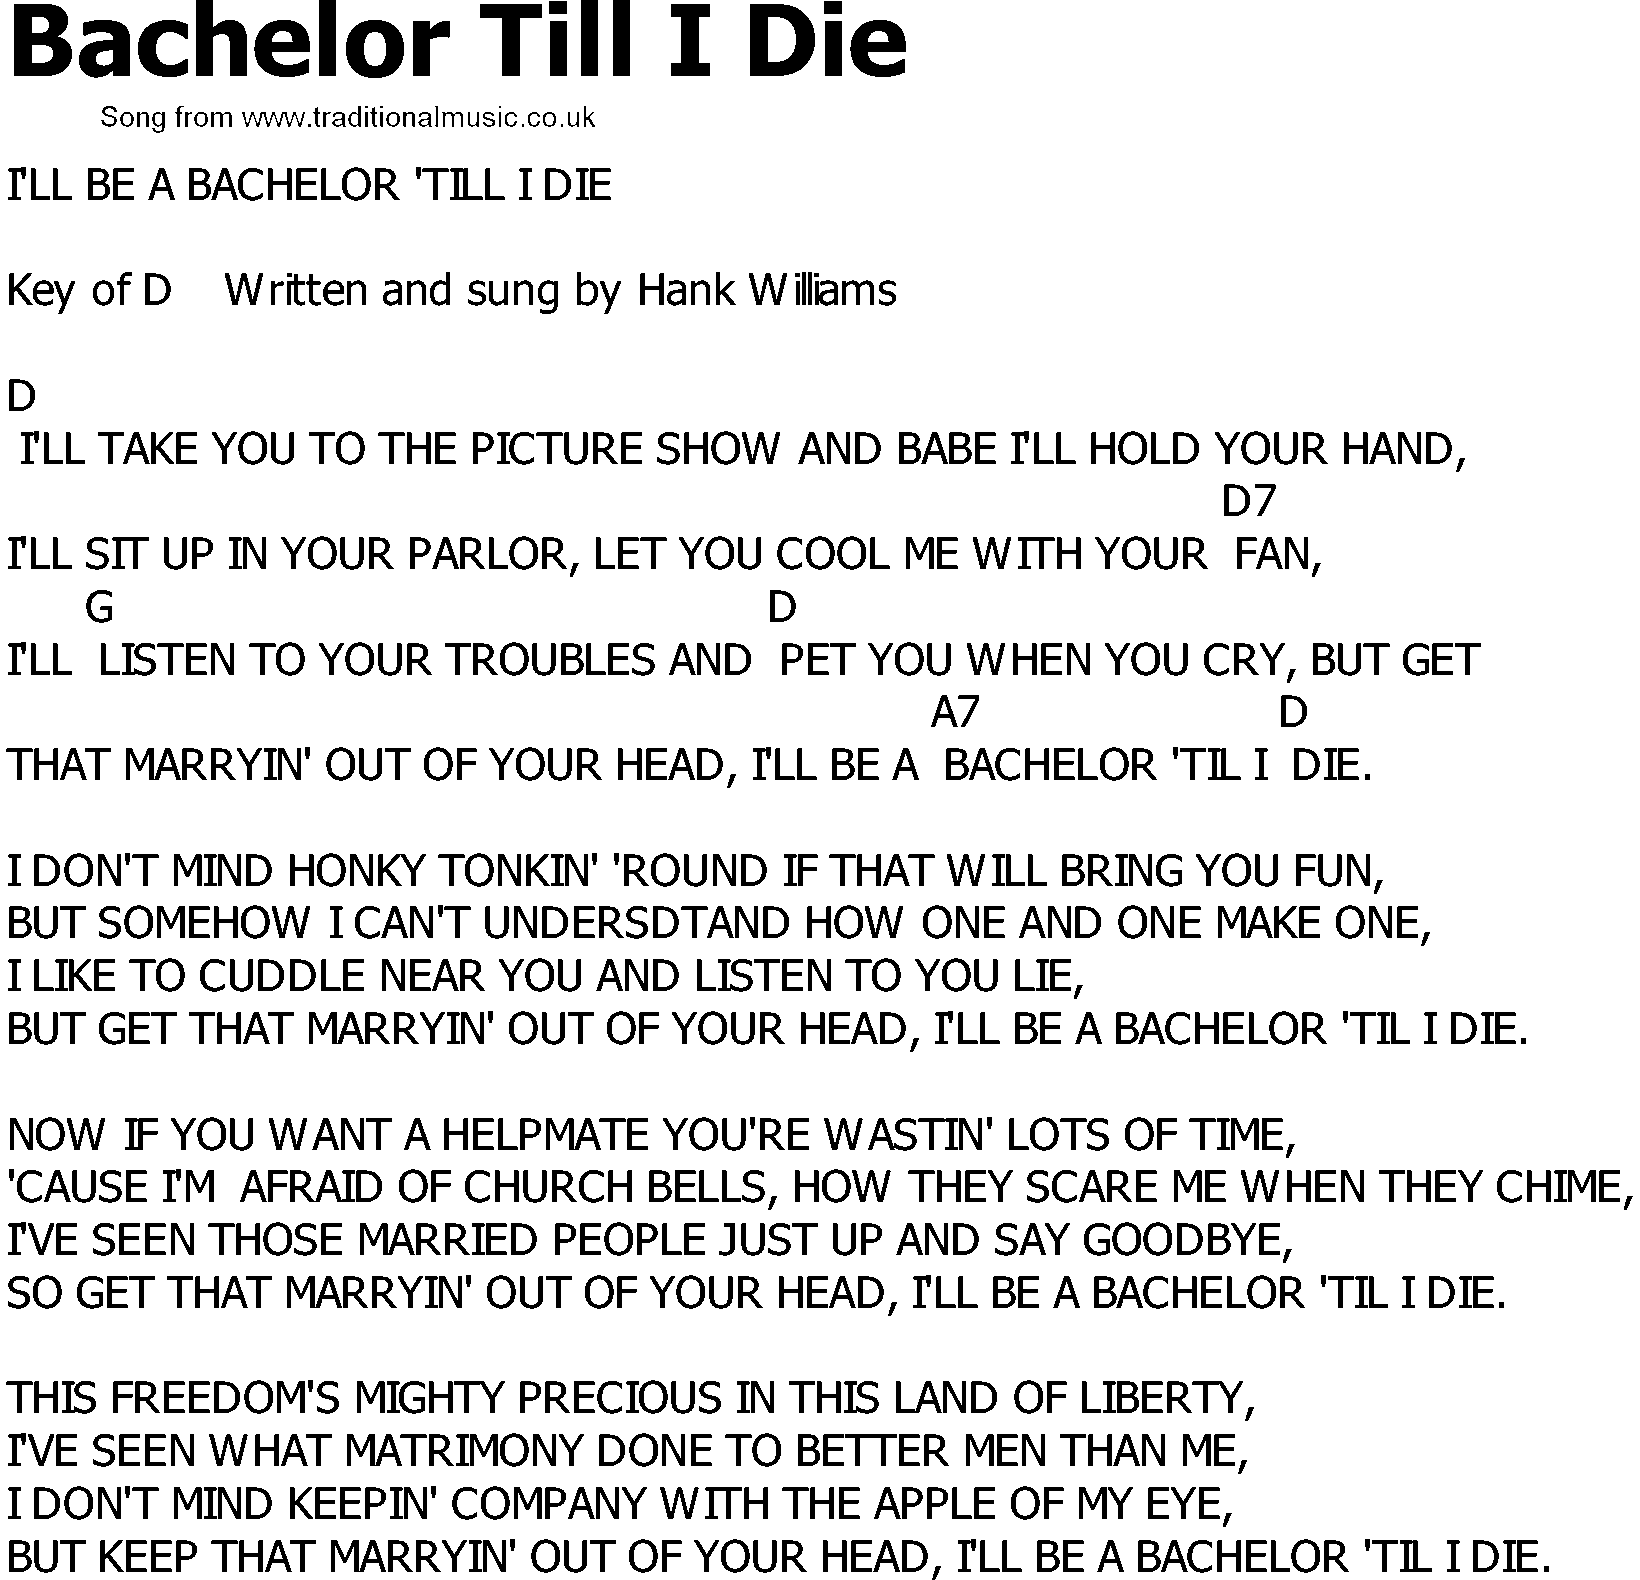 Old Country song lyrics with chords - Bachelor Till I Die